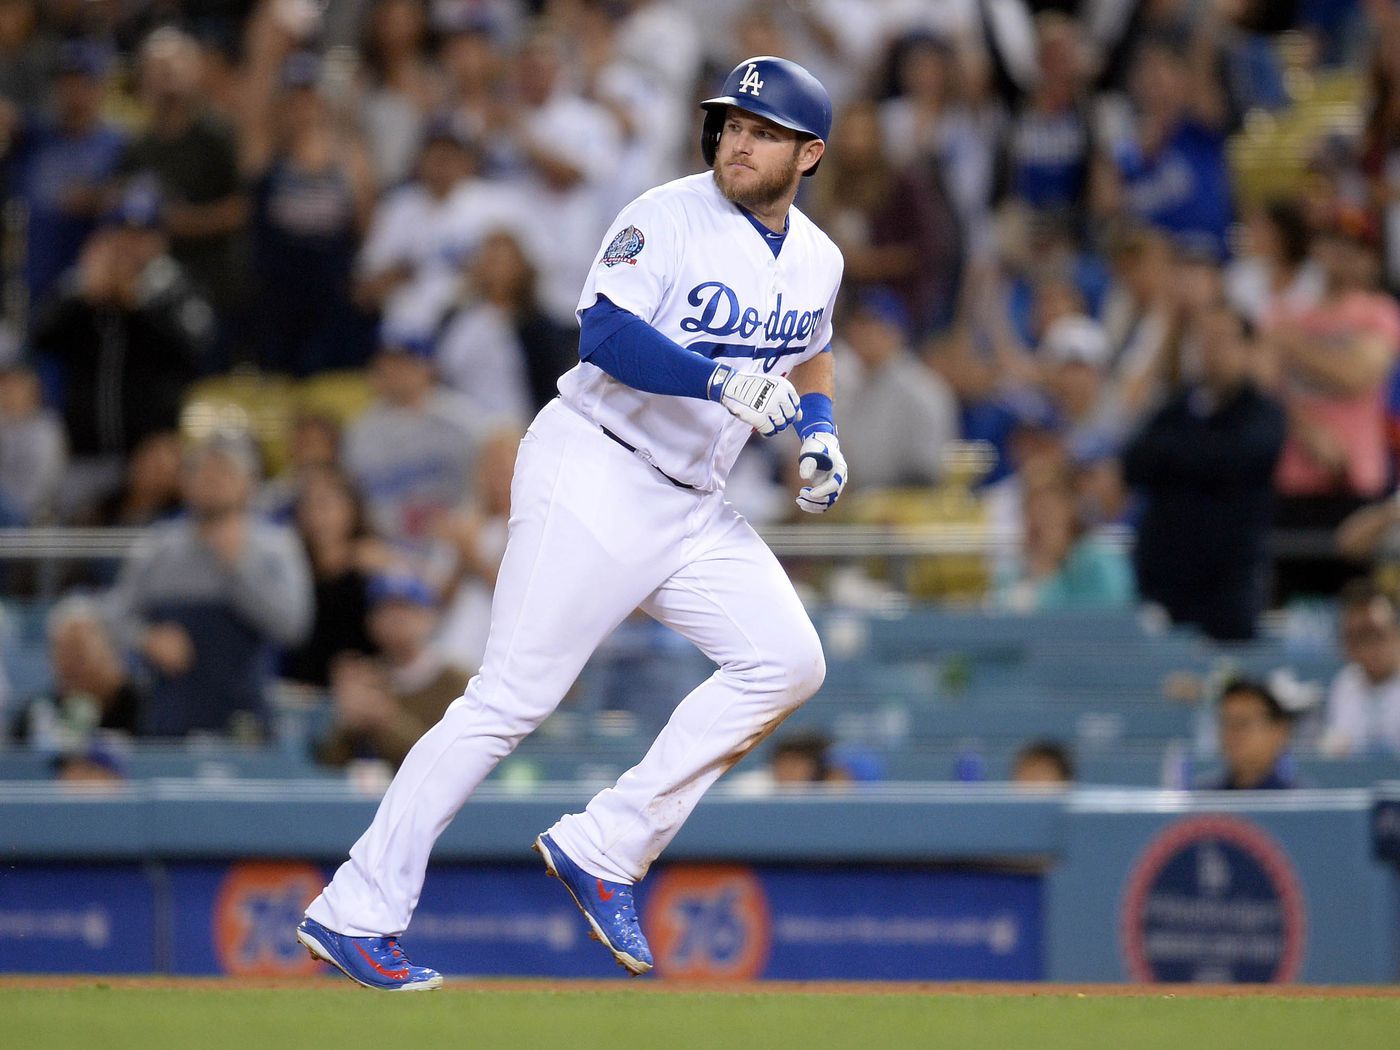 Thoughts on Dodgers infielder Max Muncy League Ball